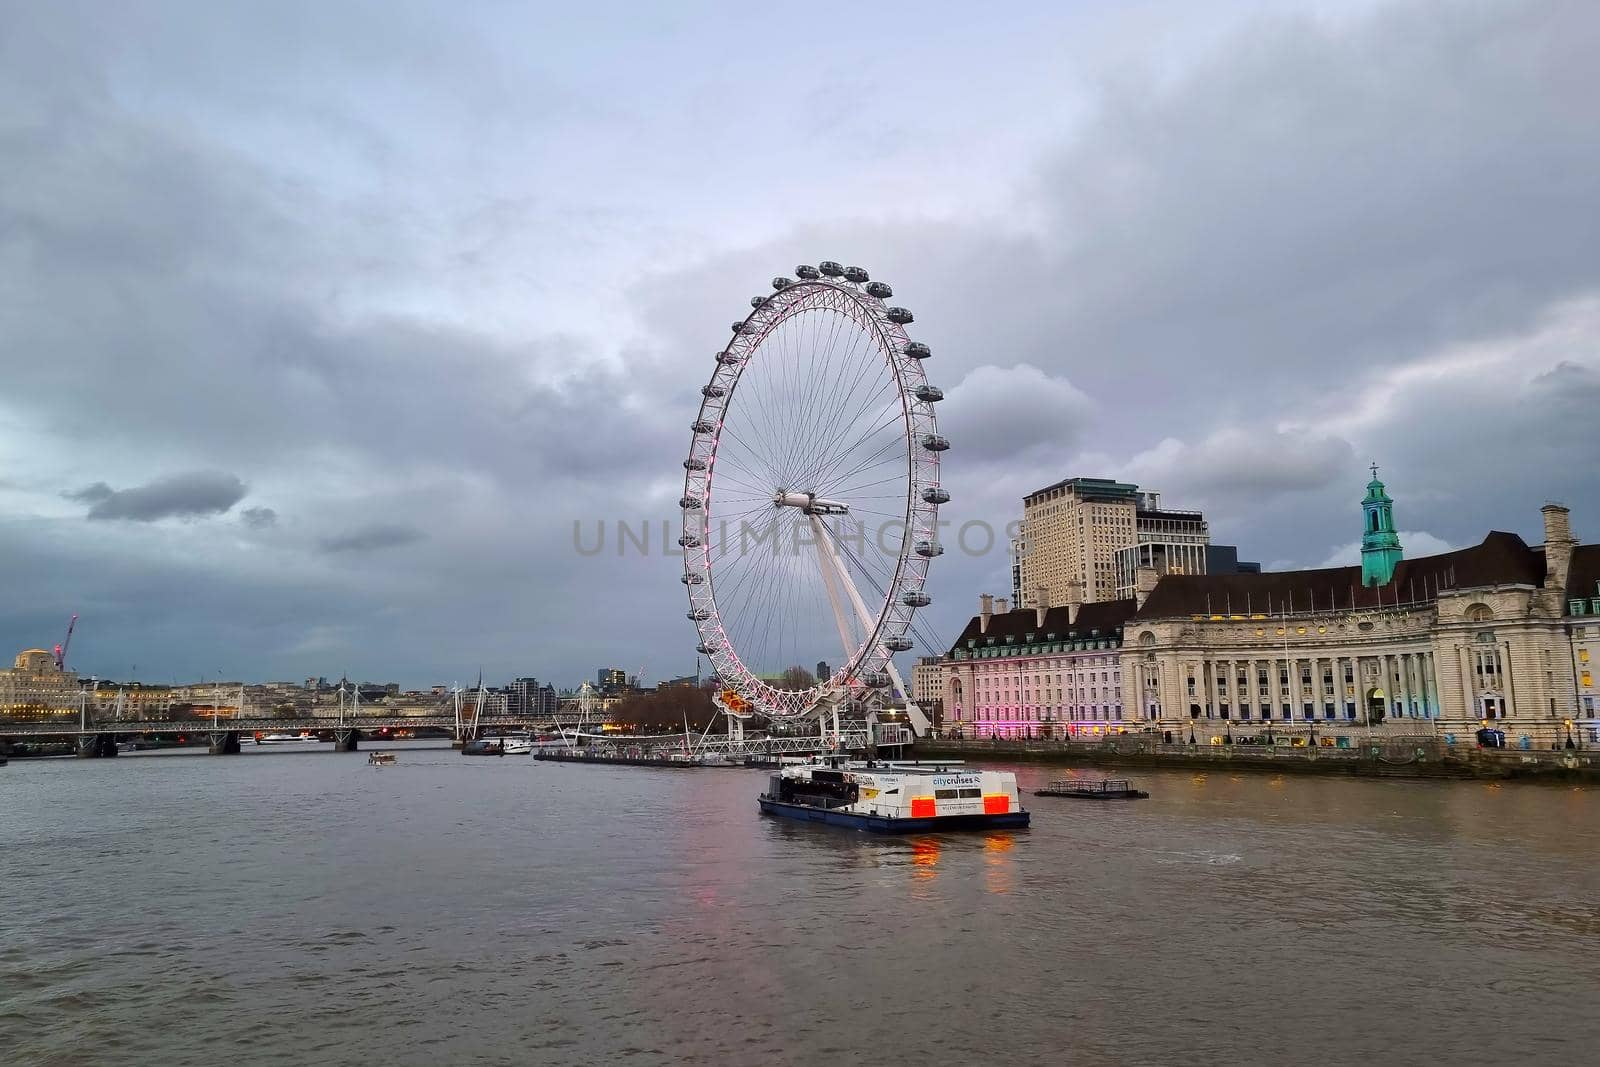 London, United Kingdom, February 7, 2022: Scenic view of the River Thames in London. The London Eye is a Ferris wheel in London, located in the Lambeth district on the south bank of the Thames. The largest in Europe and one of the largest in the world.